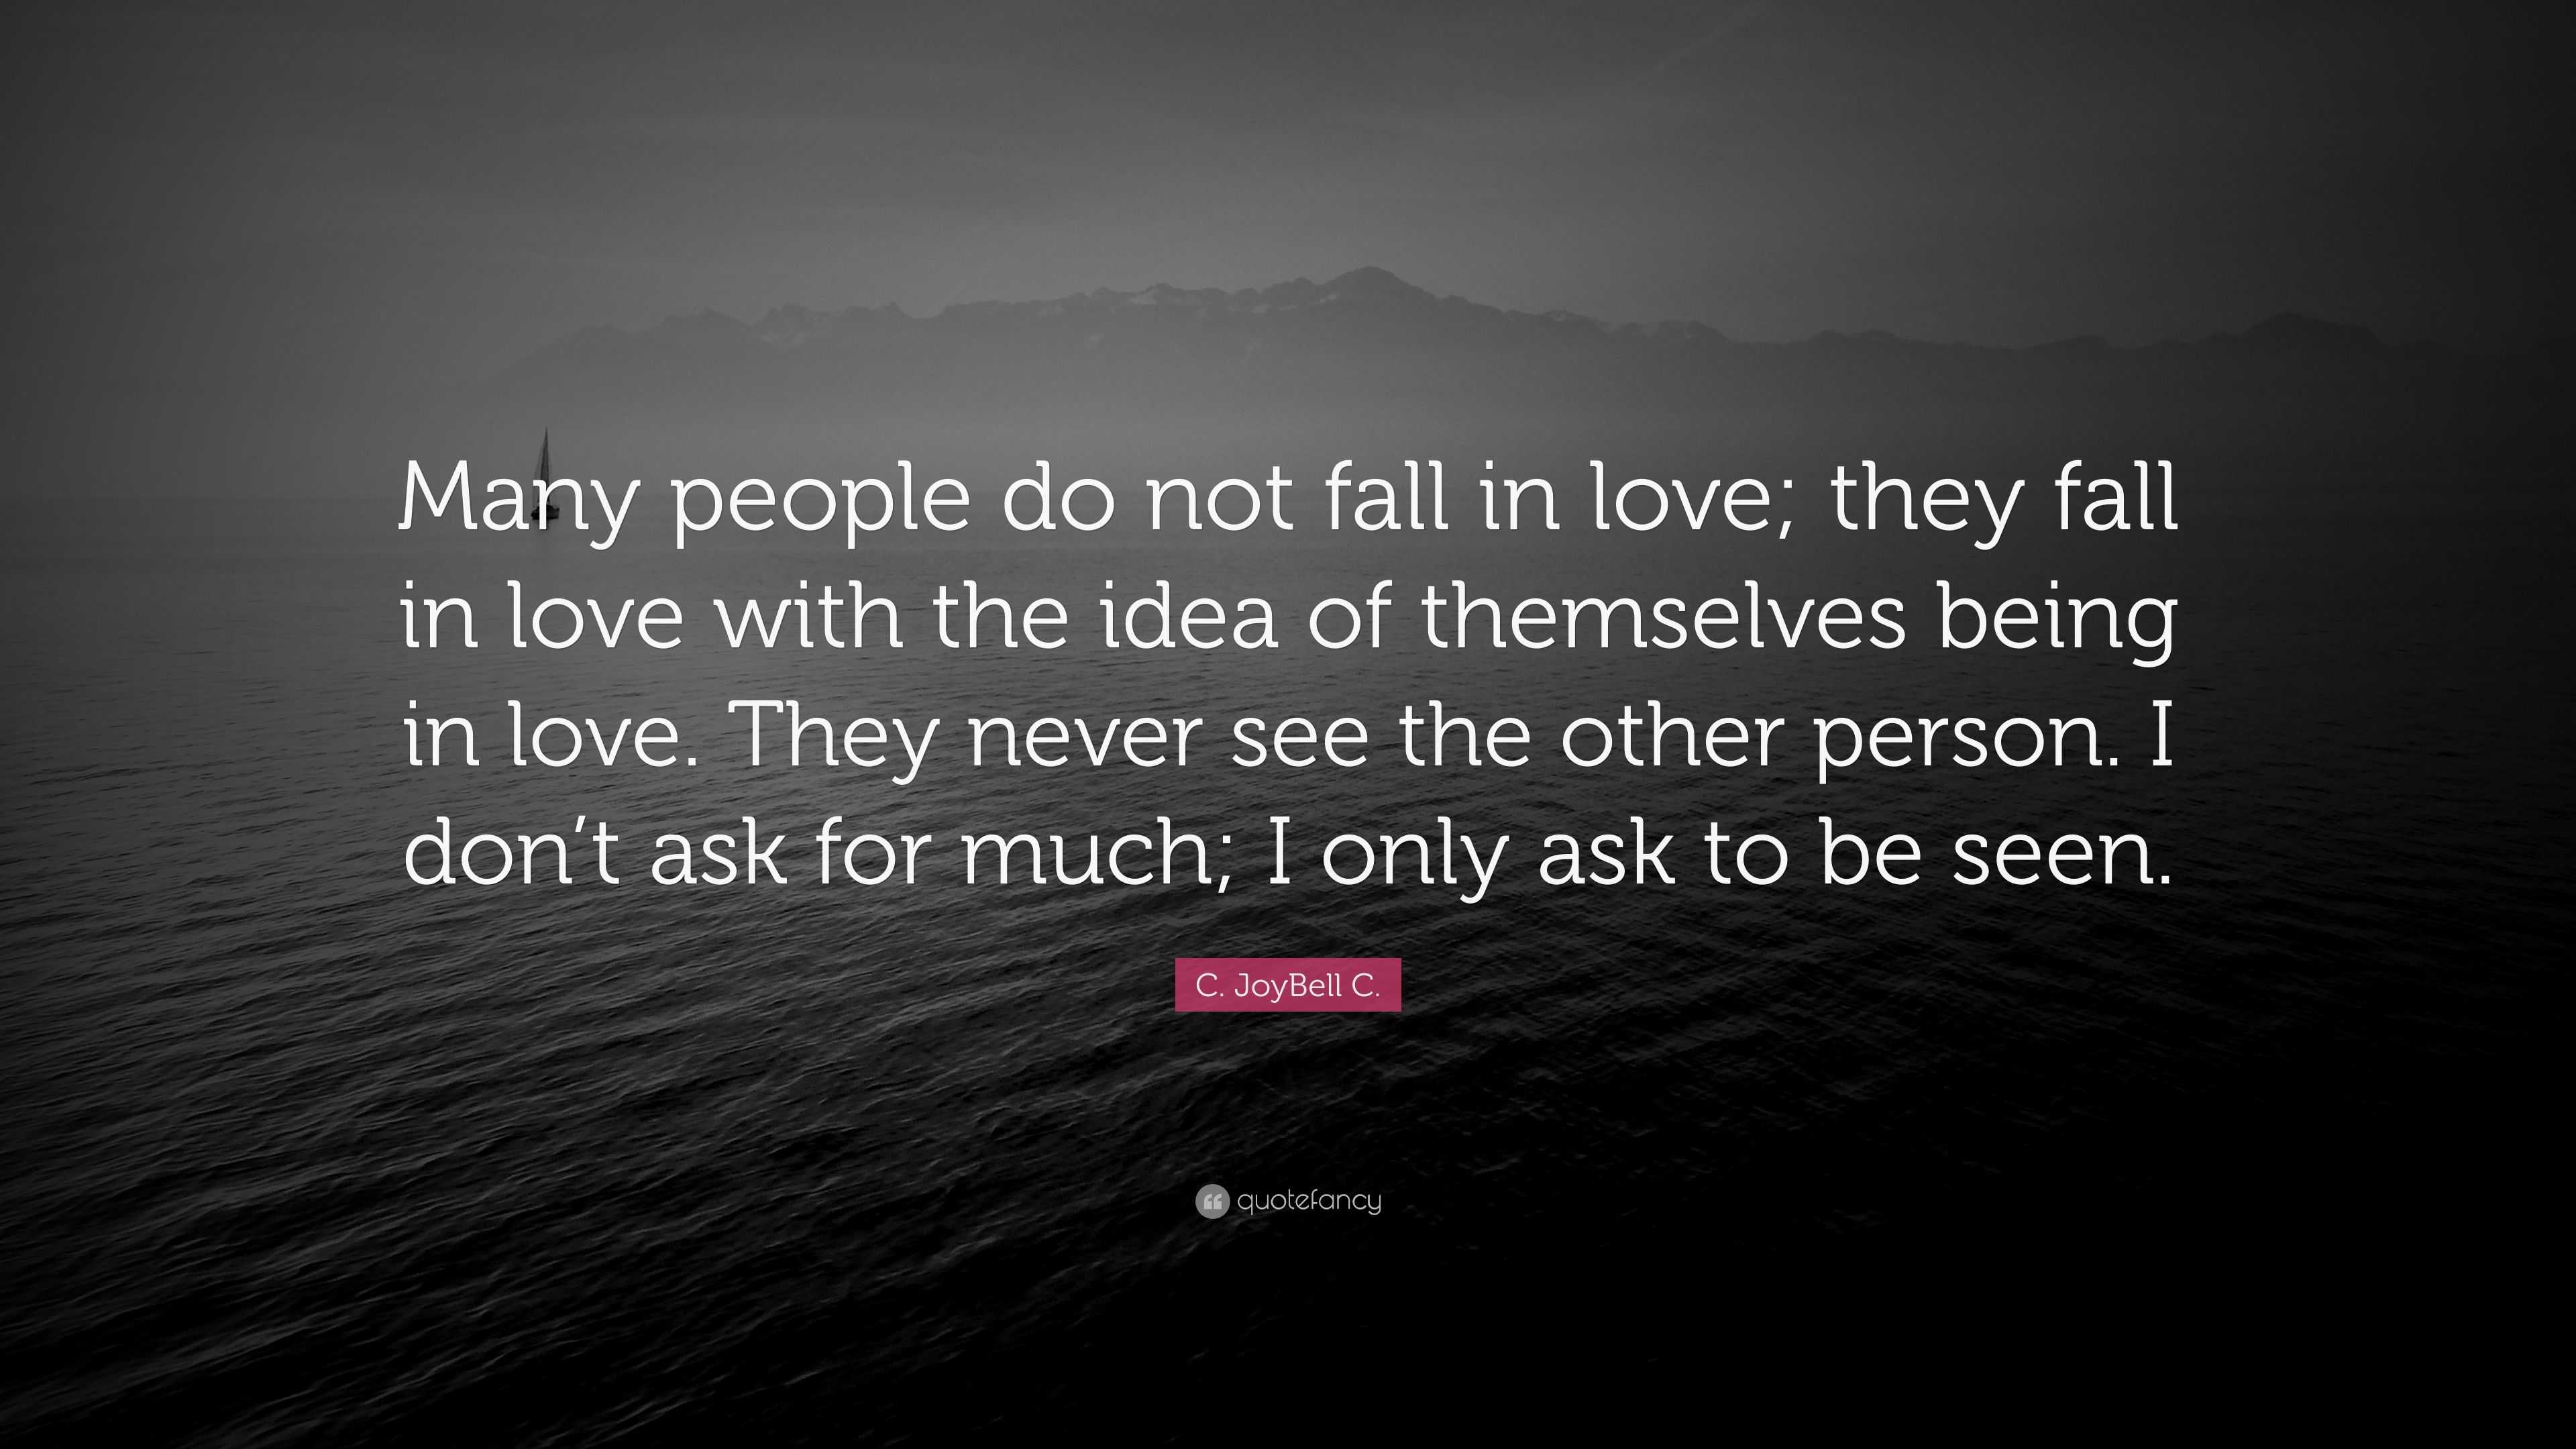 C. JoyBell C. Quote: “Many people do not fall in love; they fall in ...